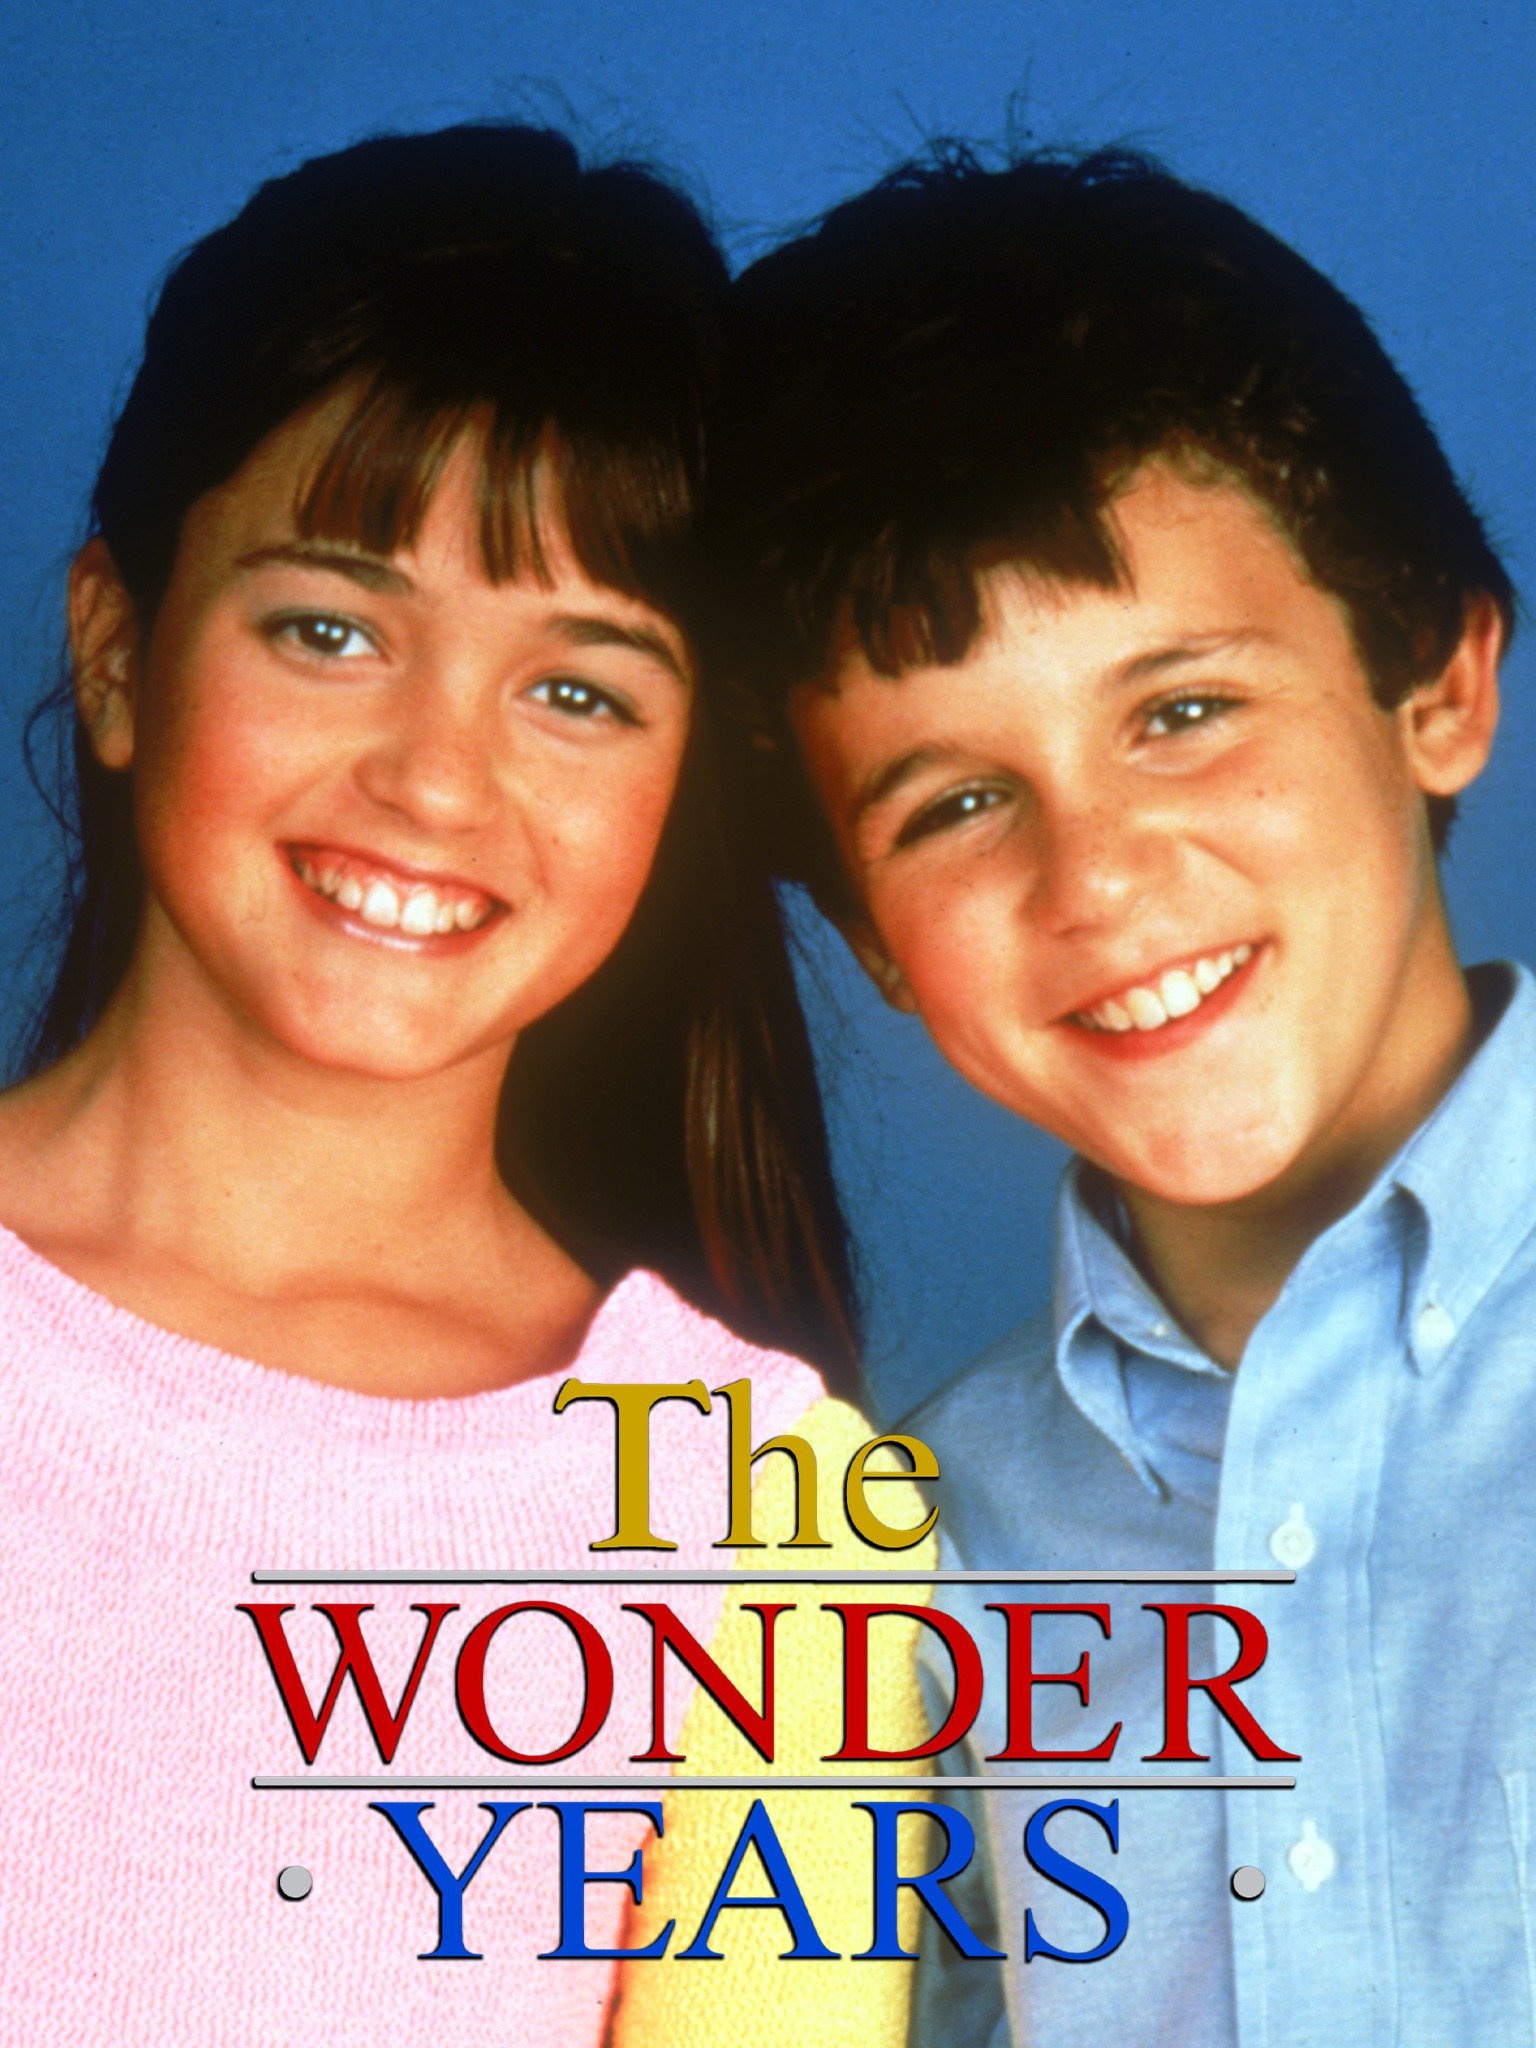 The Wonder Years Never Really Concluded…